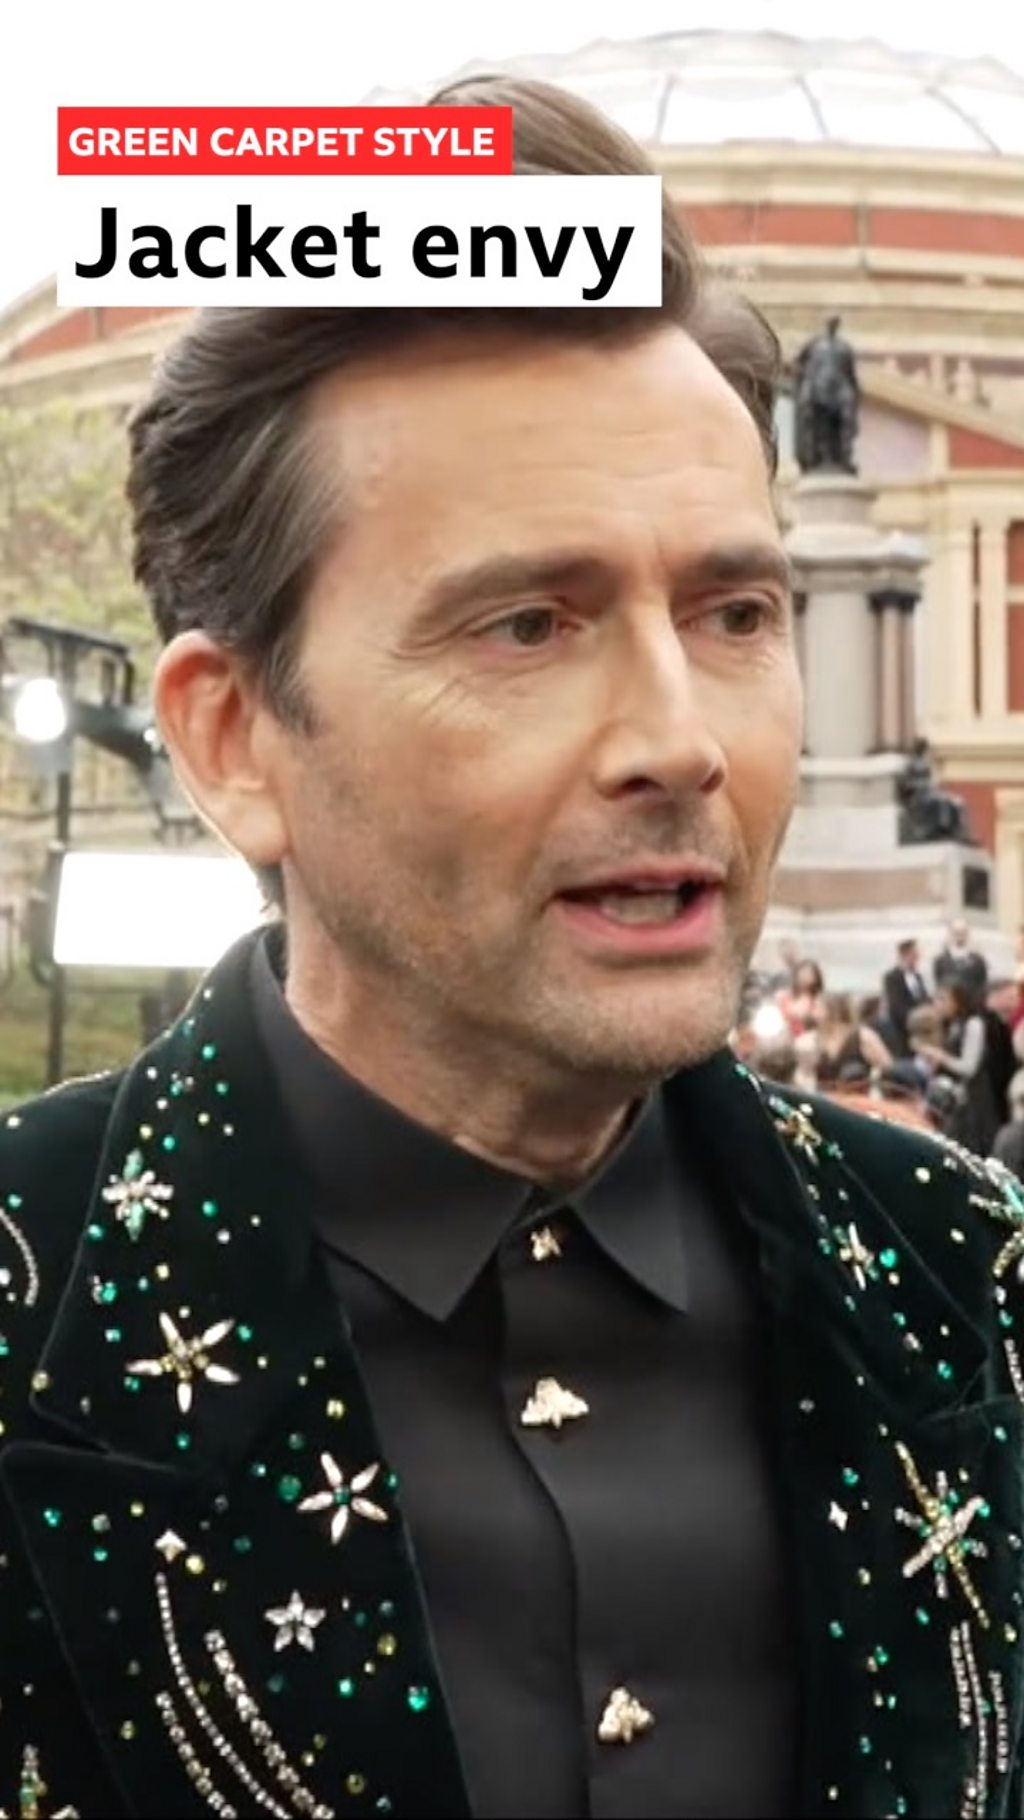 David Tennant on the green carpet in a star studded jacket